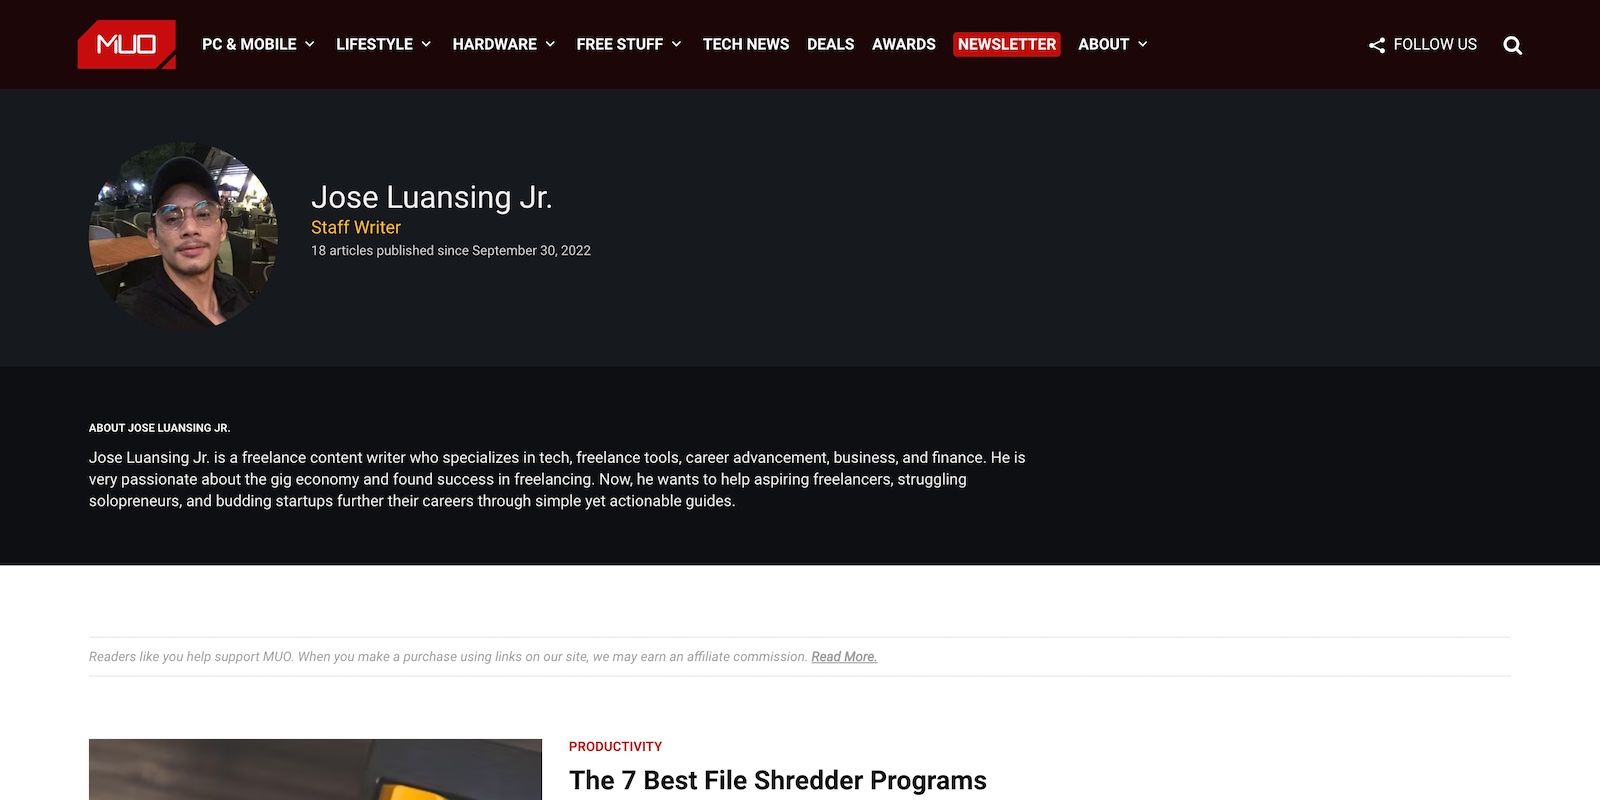 The About Page of MUO Writer Jose Luansing Jr.